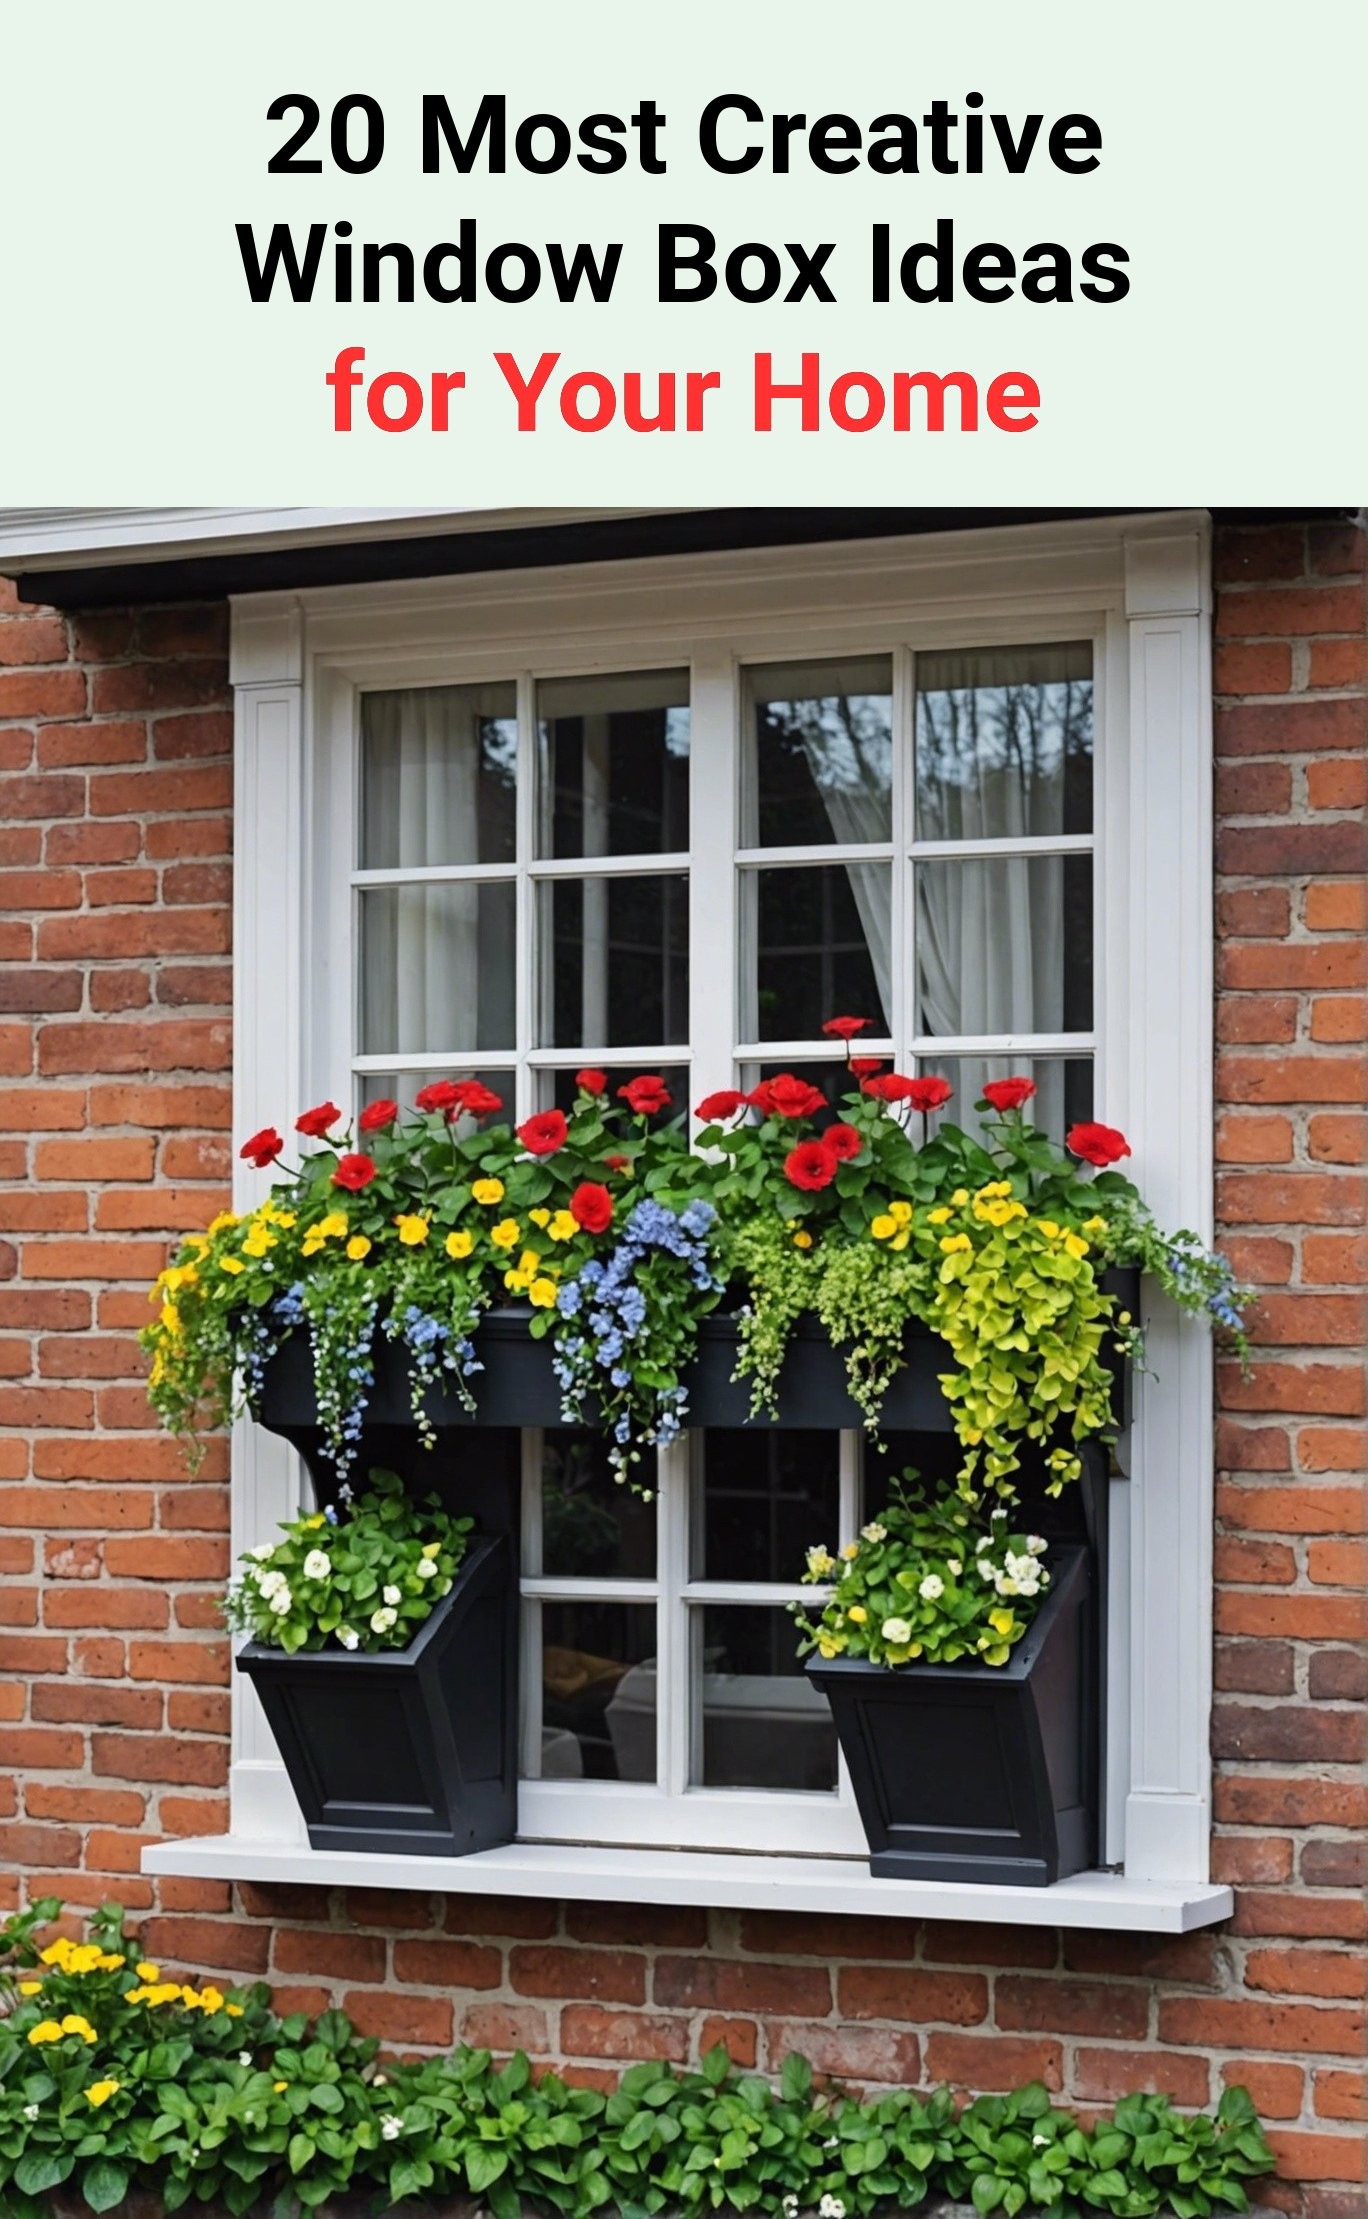 20 Most Creative Window Box Ideas for Your Home